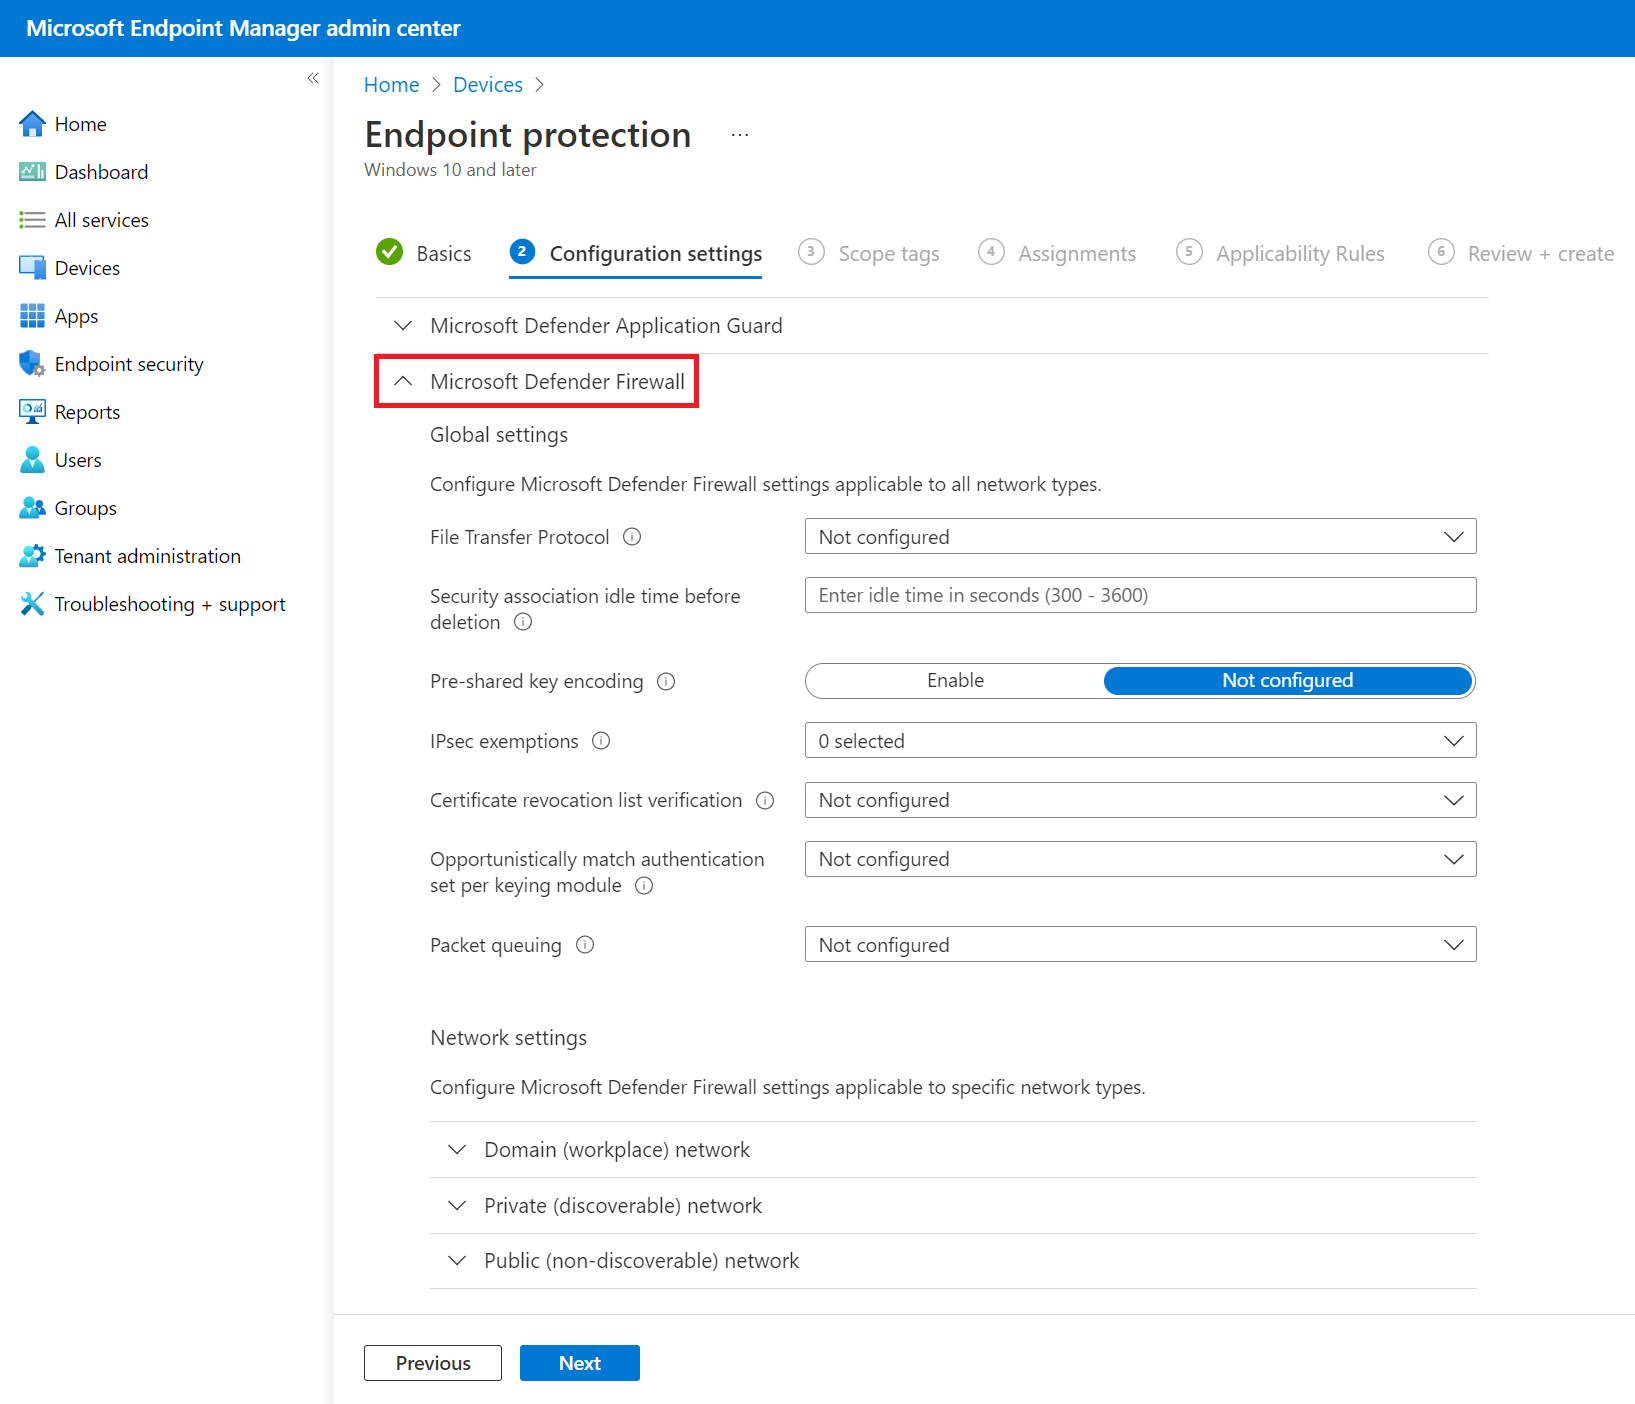 Edit Microsoft Intune Protocol, your organization's data cannot be pasted here